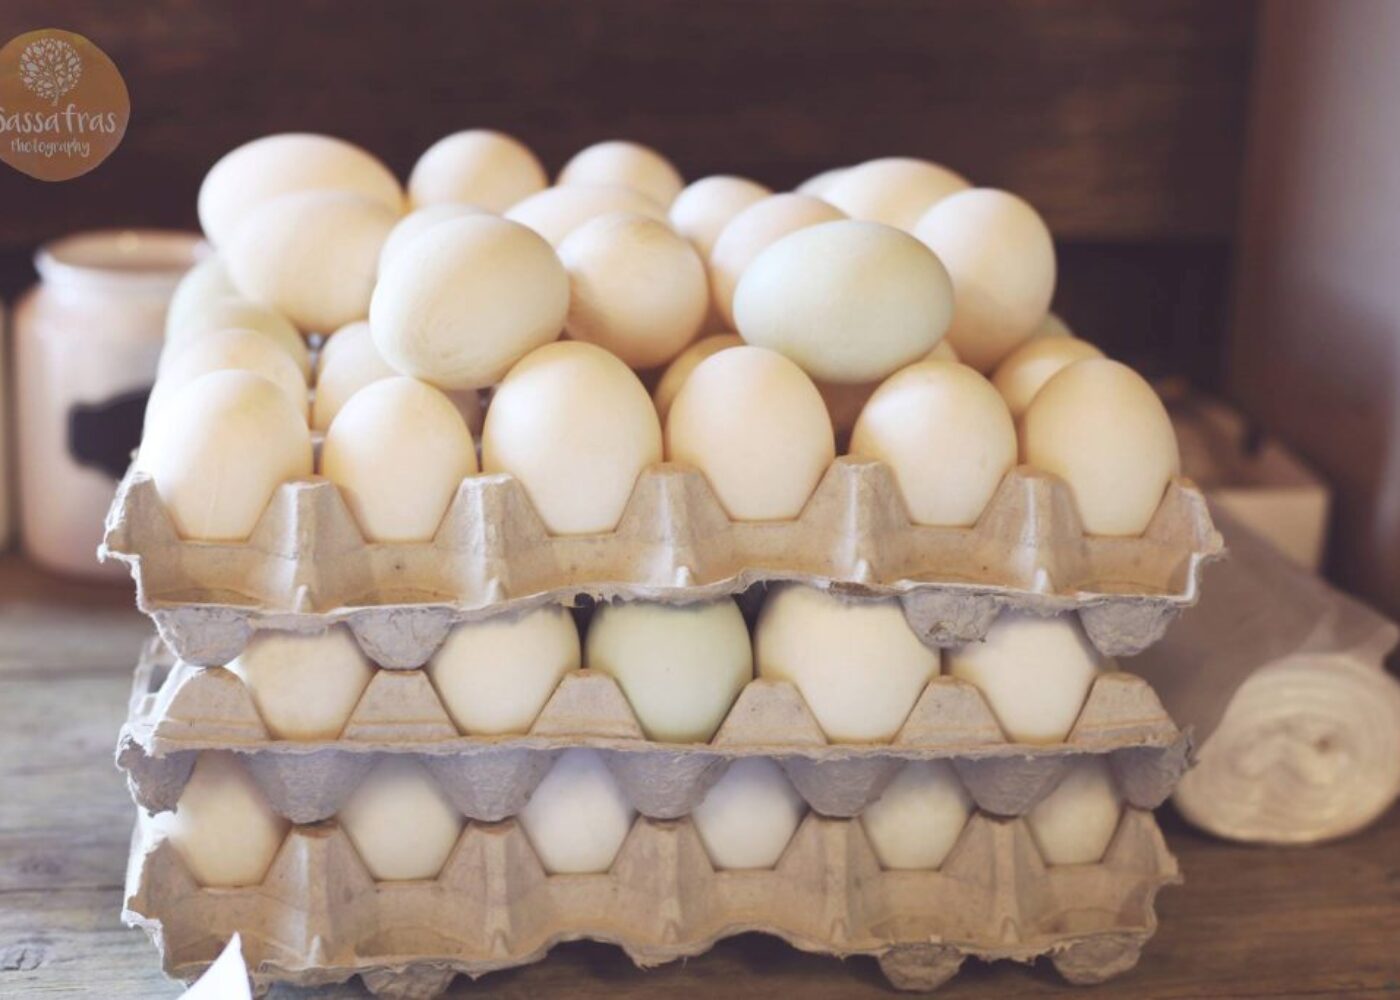 eggs and food allergies